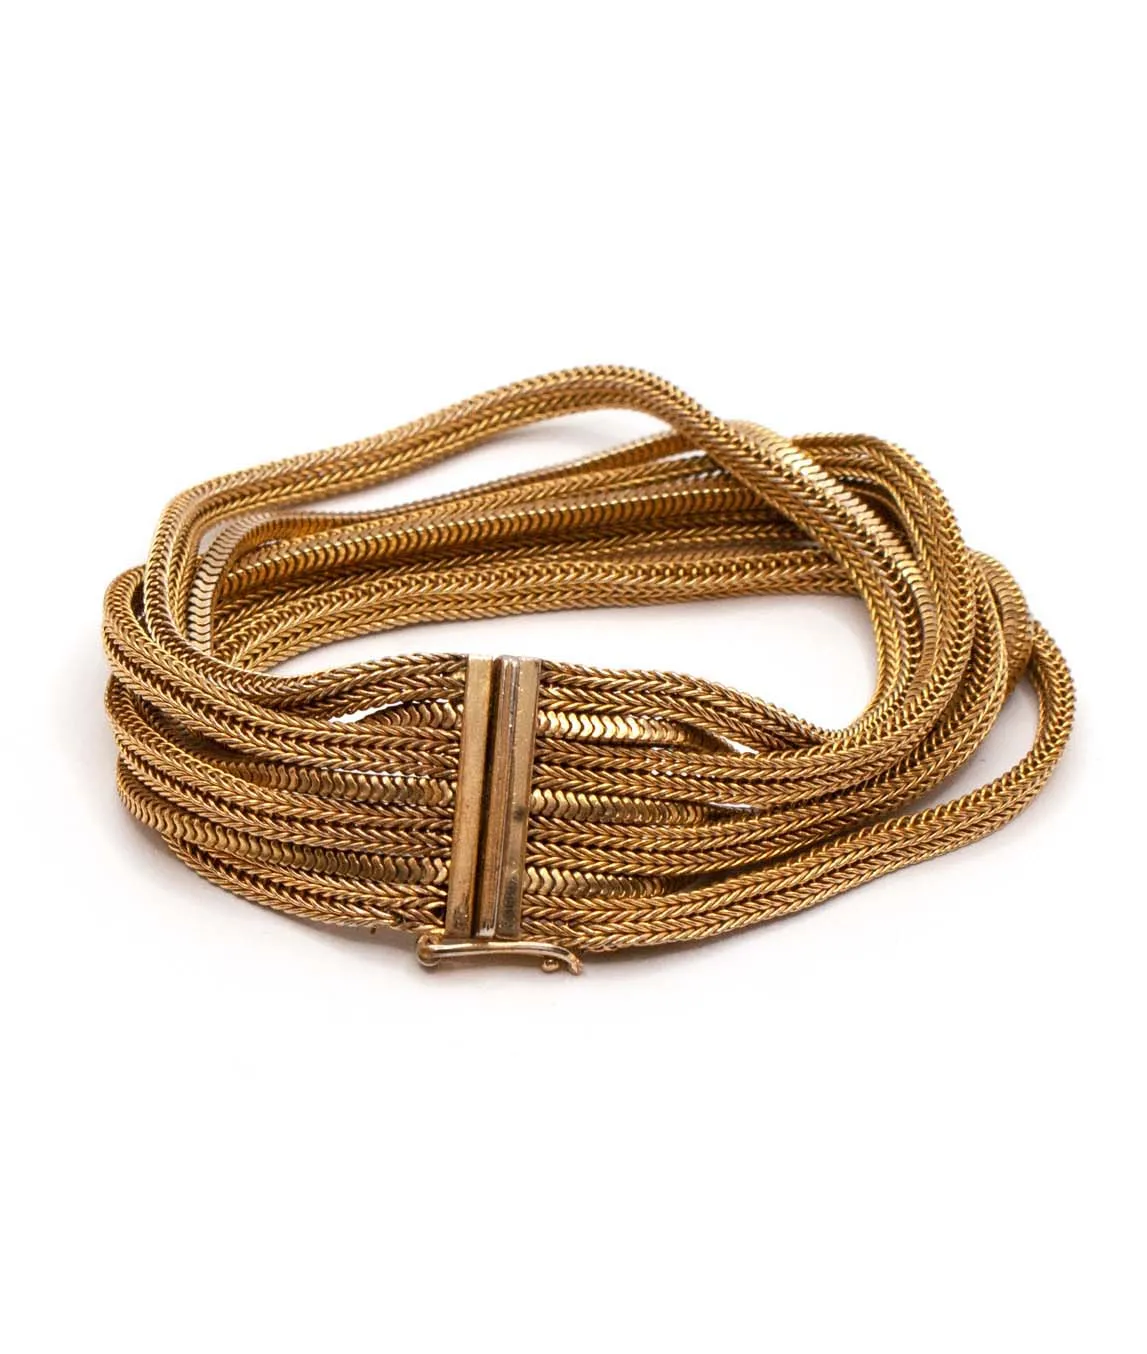 Grosse multi-chain woven gold plated bracelet fastened on a white background